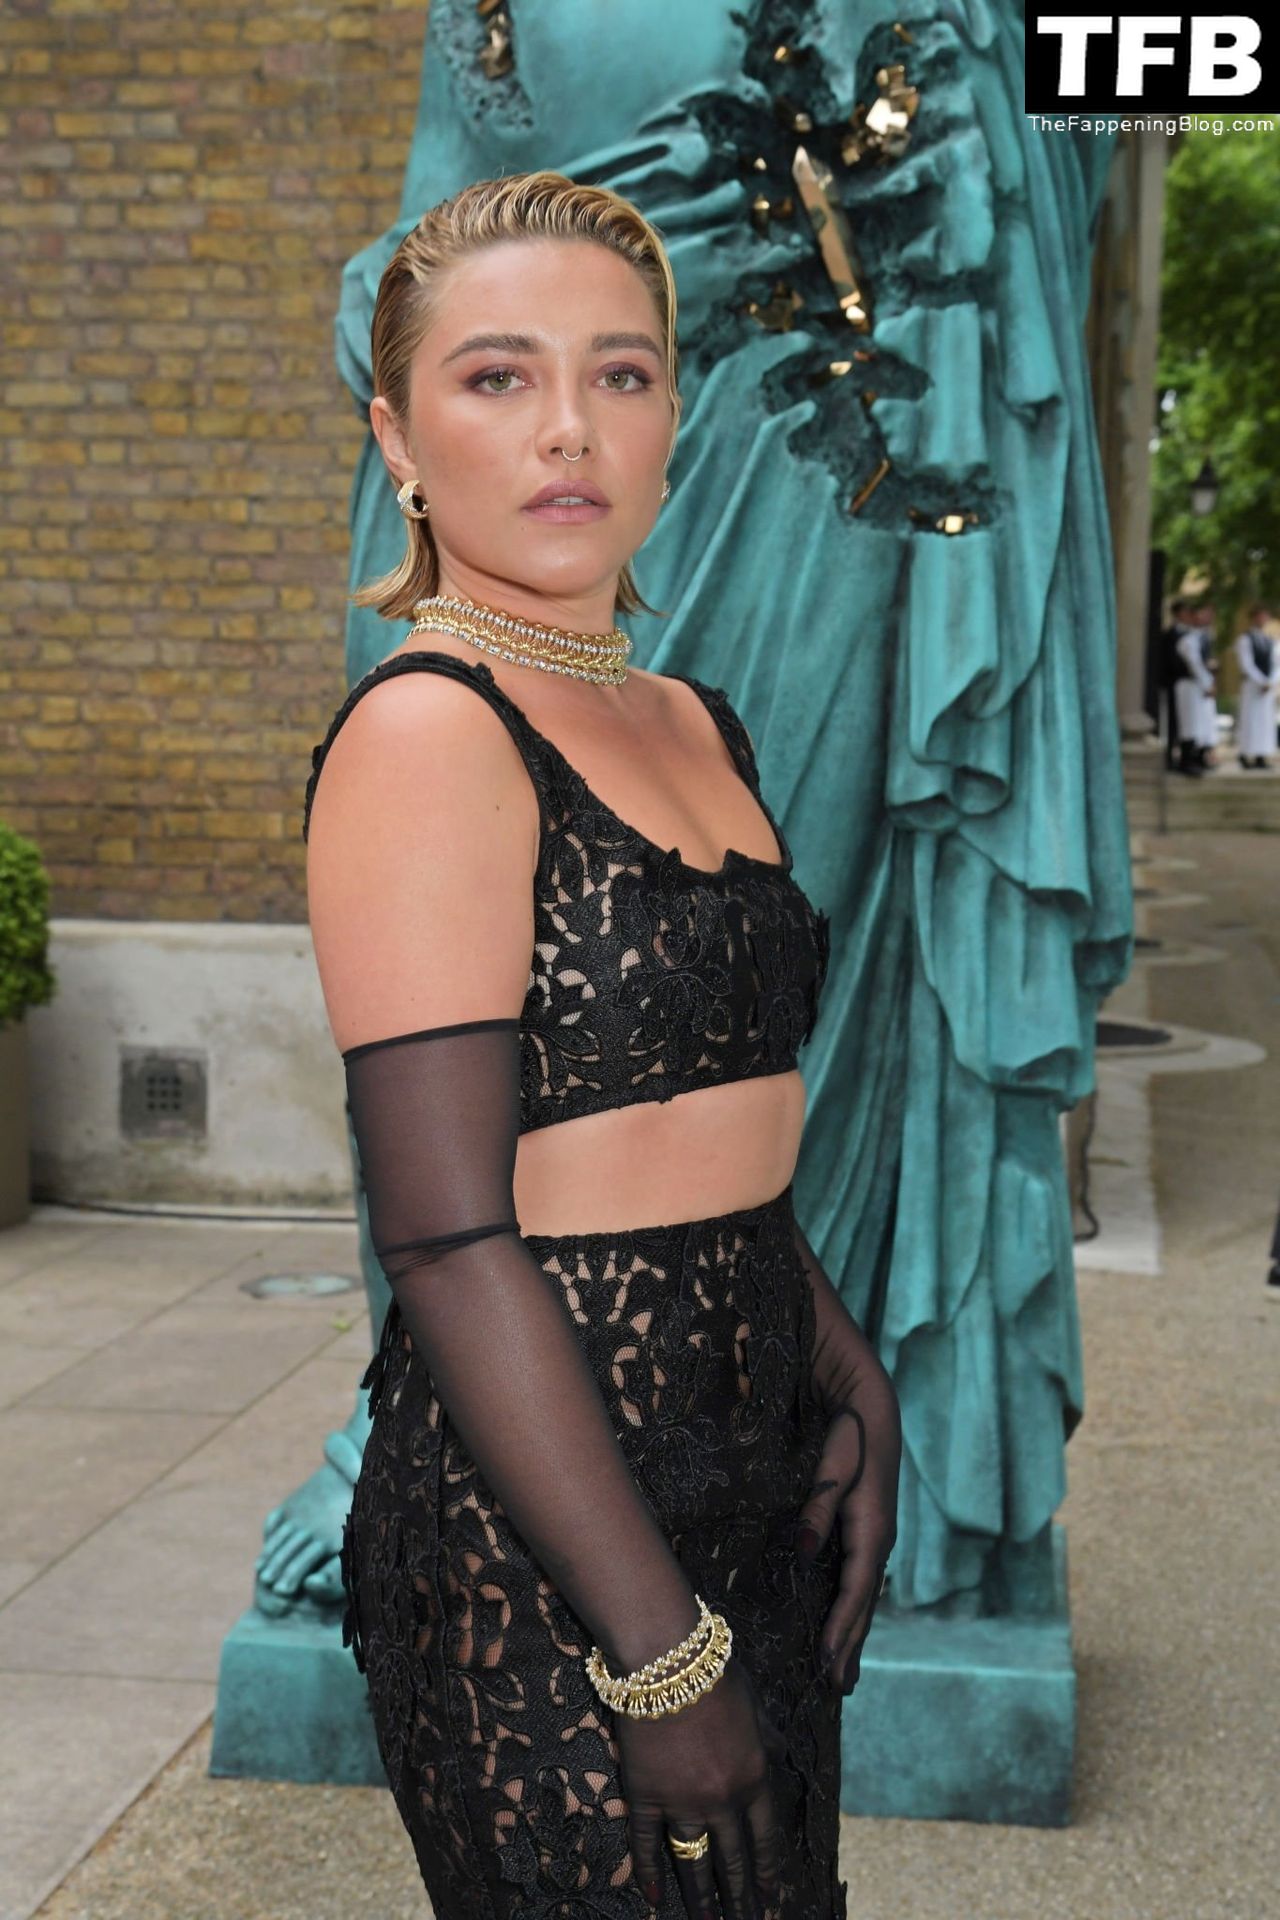 Florence-Pugh-Sexy-The-Fappening-Blog-9.jpg